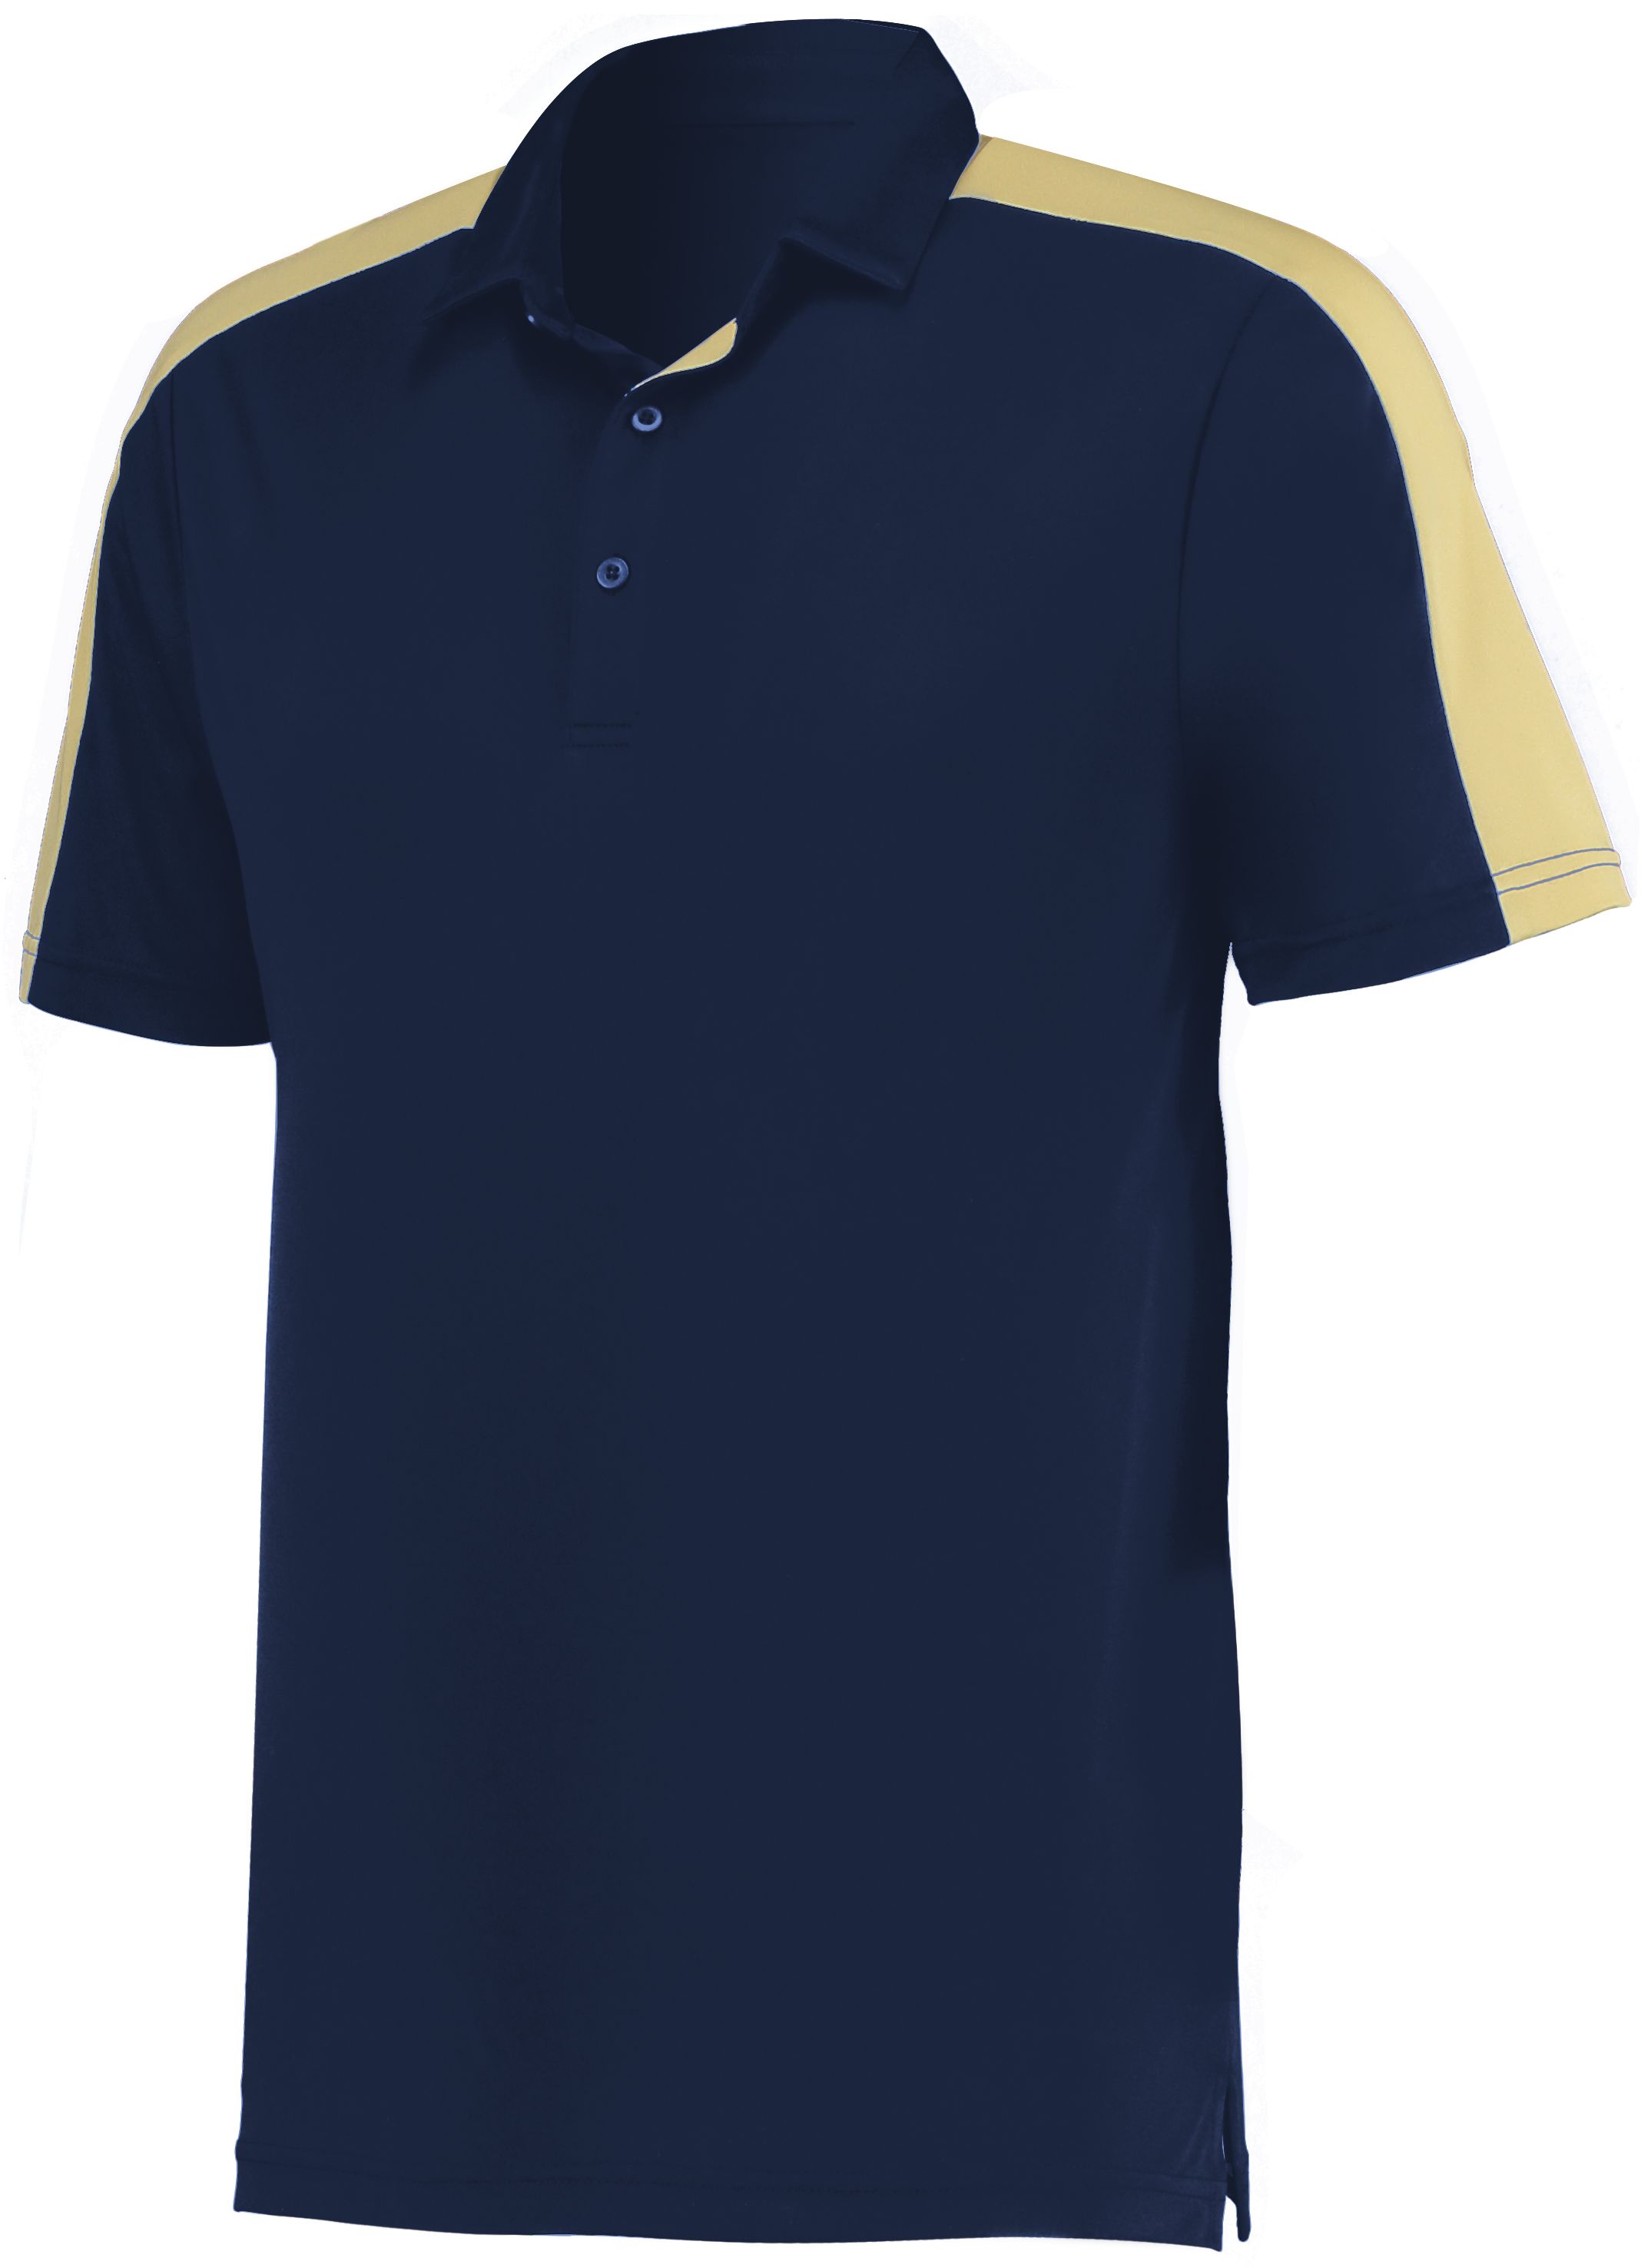 click to view Navy/Vegas Gold